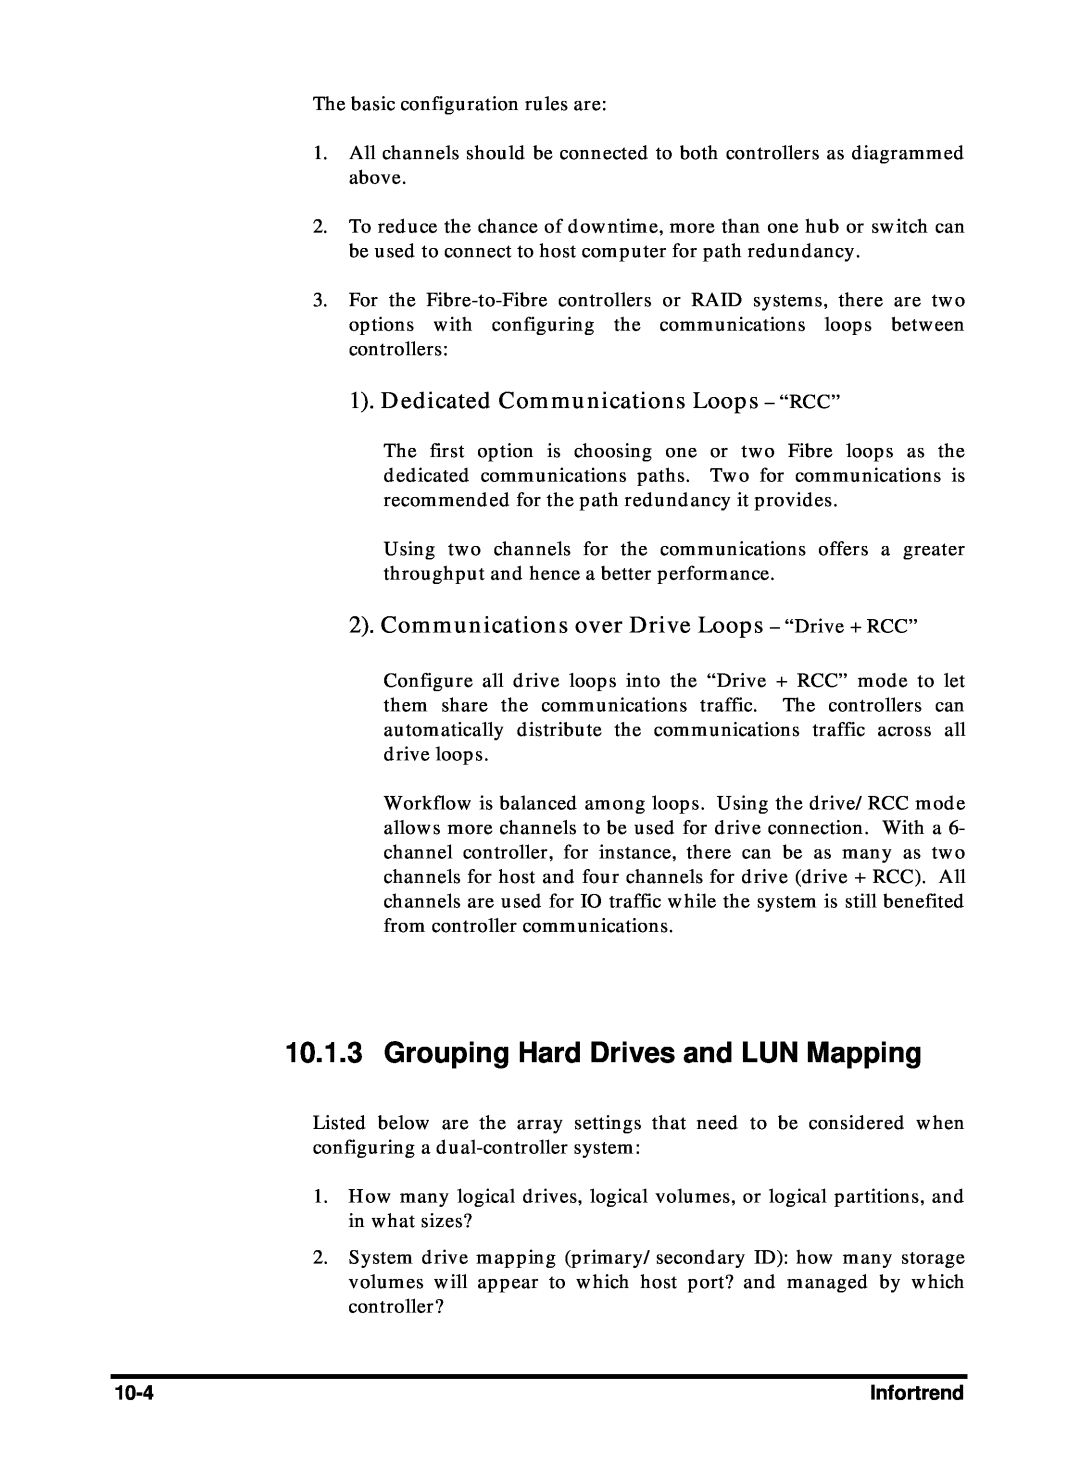 Compaq Infortrend manual Grouping Hard Drives and LUN Mapping, Dedicated Communications Loops - “RCC” 